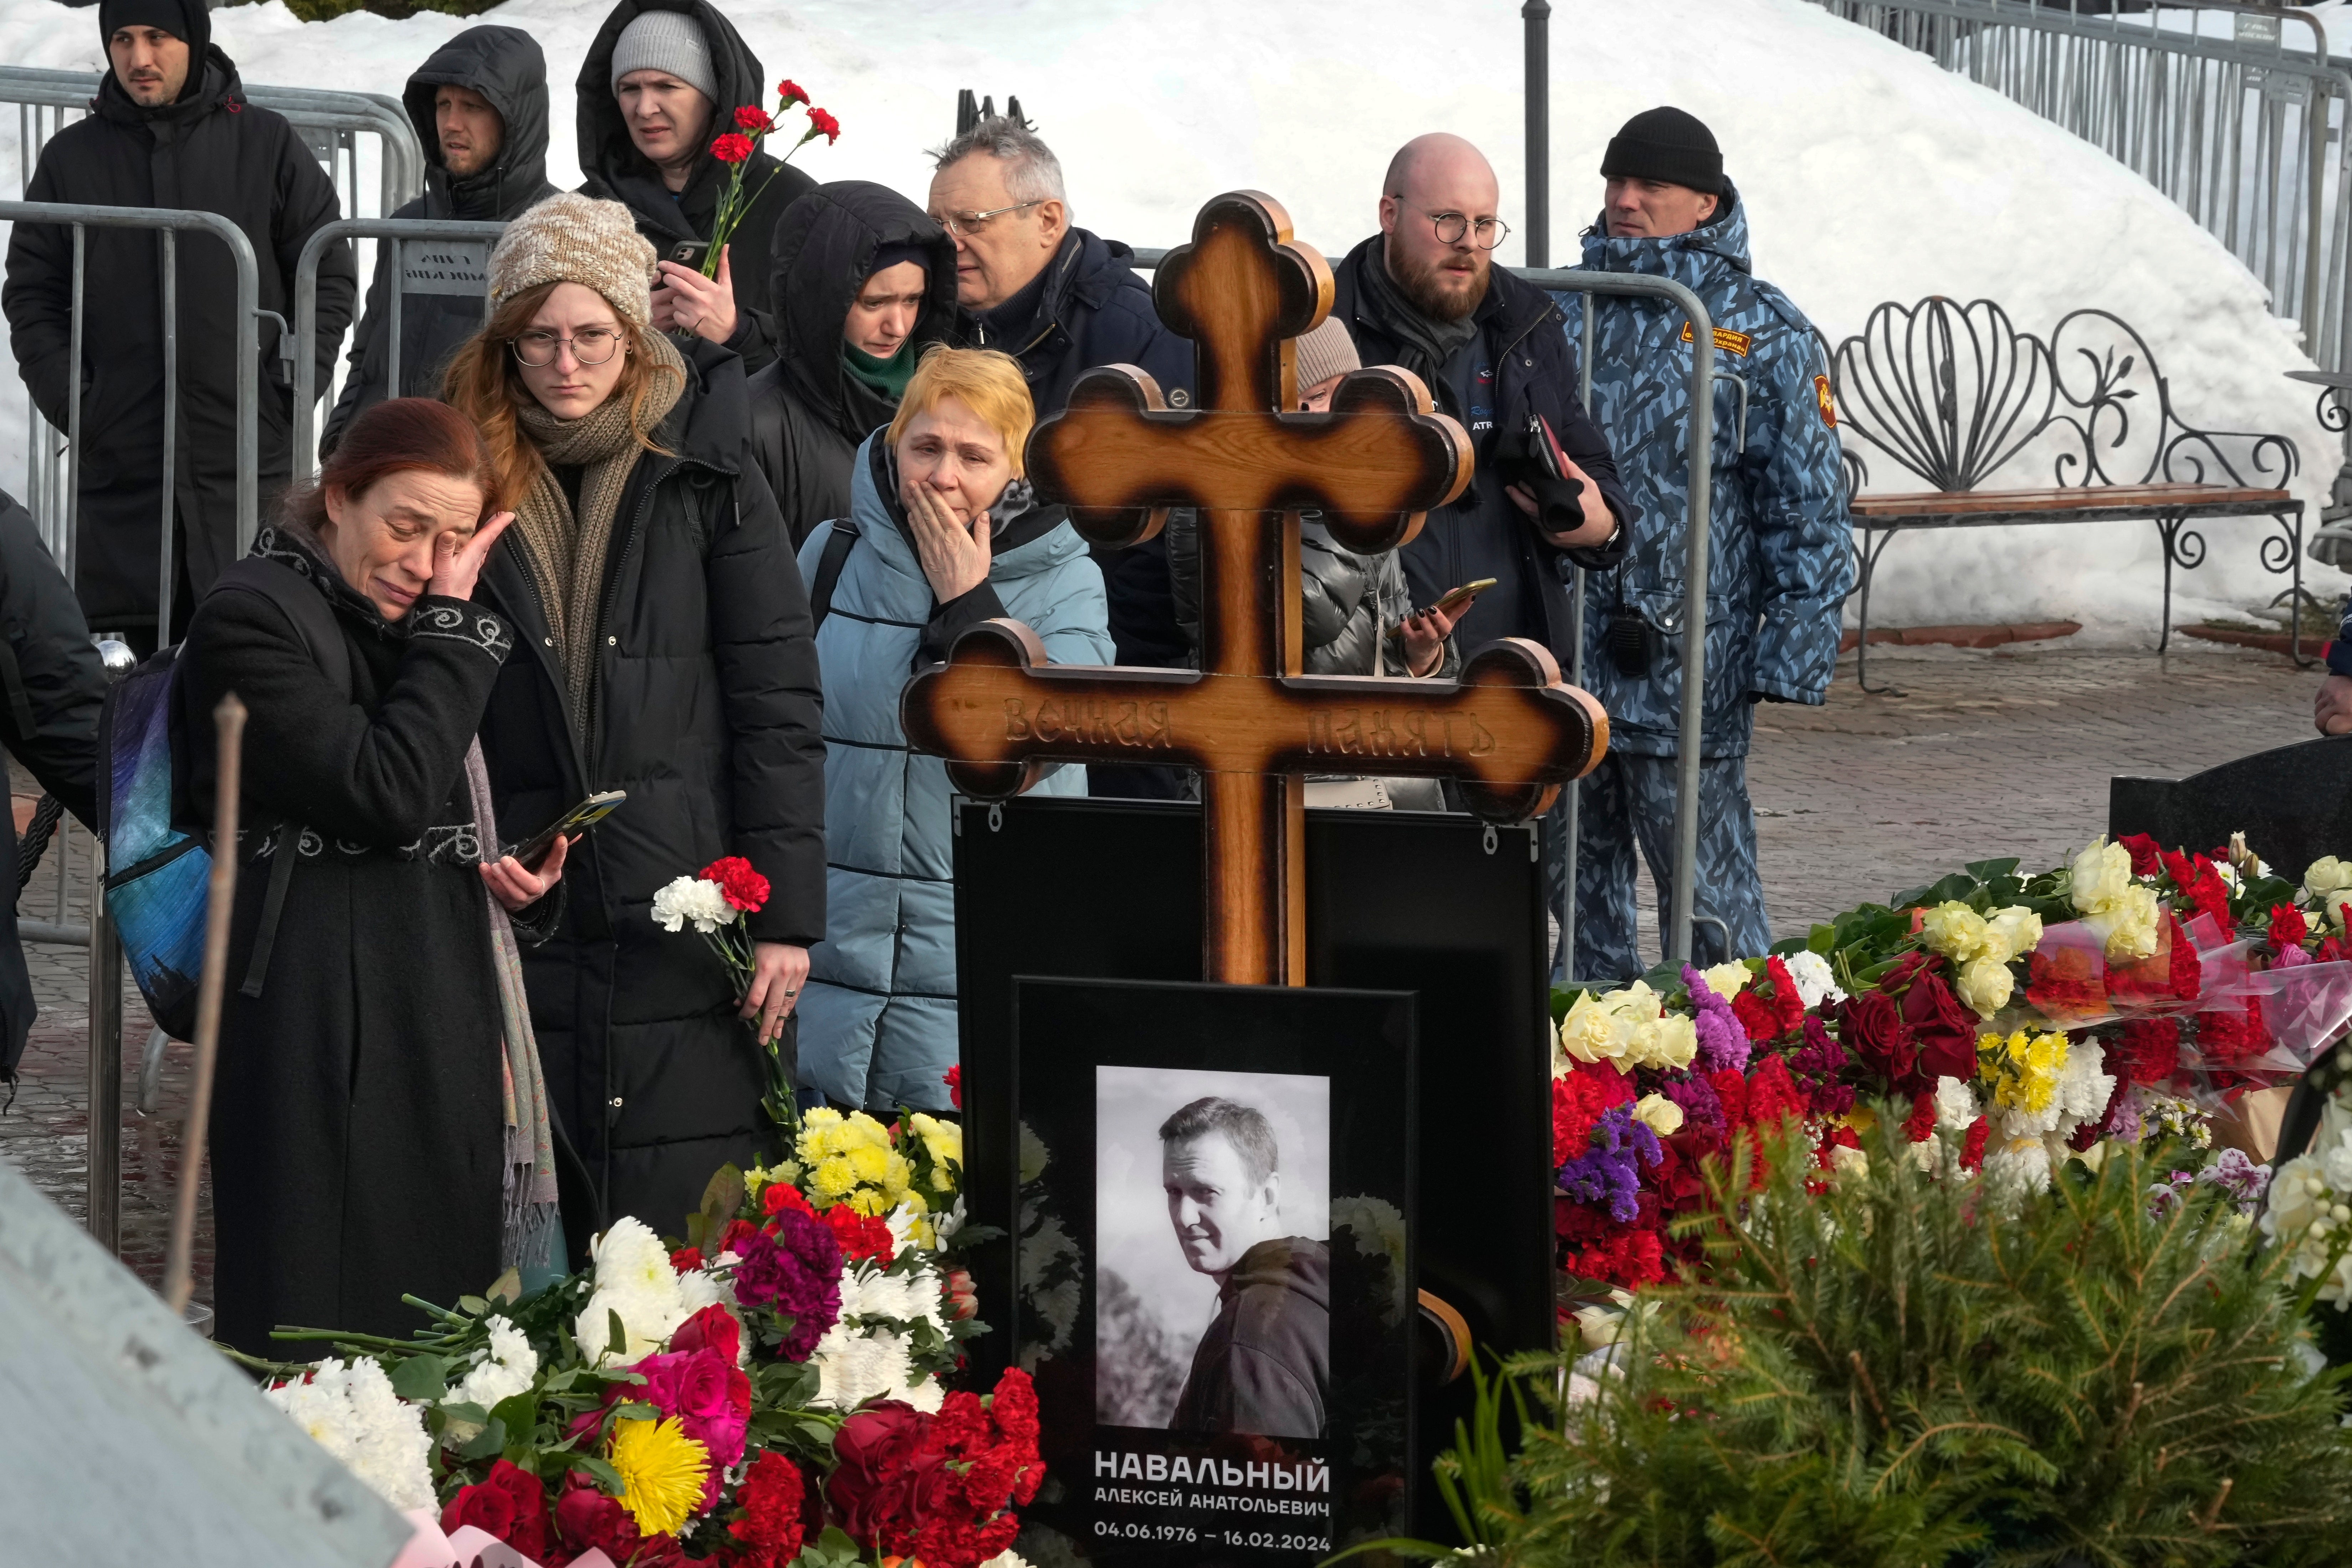 People react as they gather to lay flowers at the grave of Alexei Navalny after his funeral